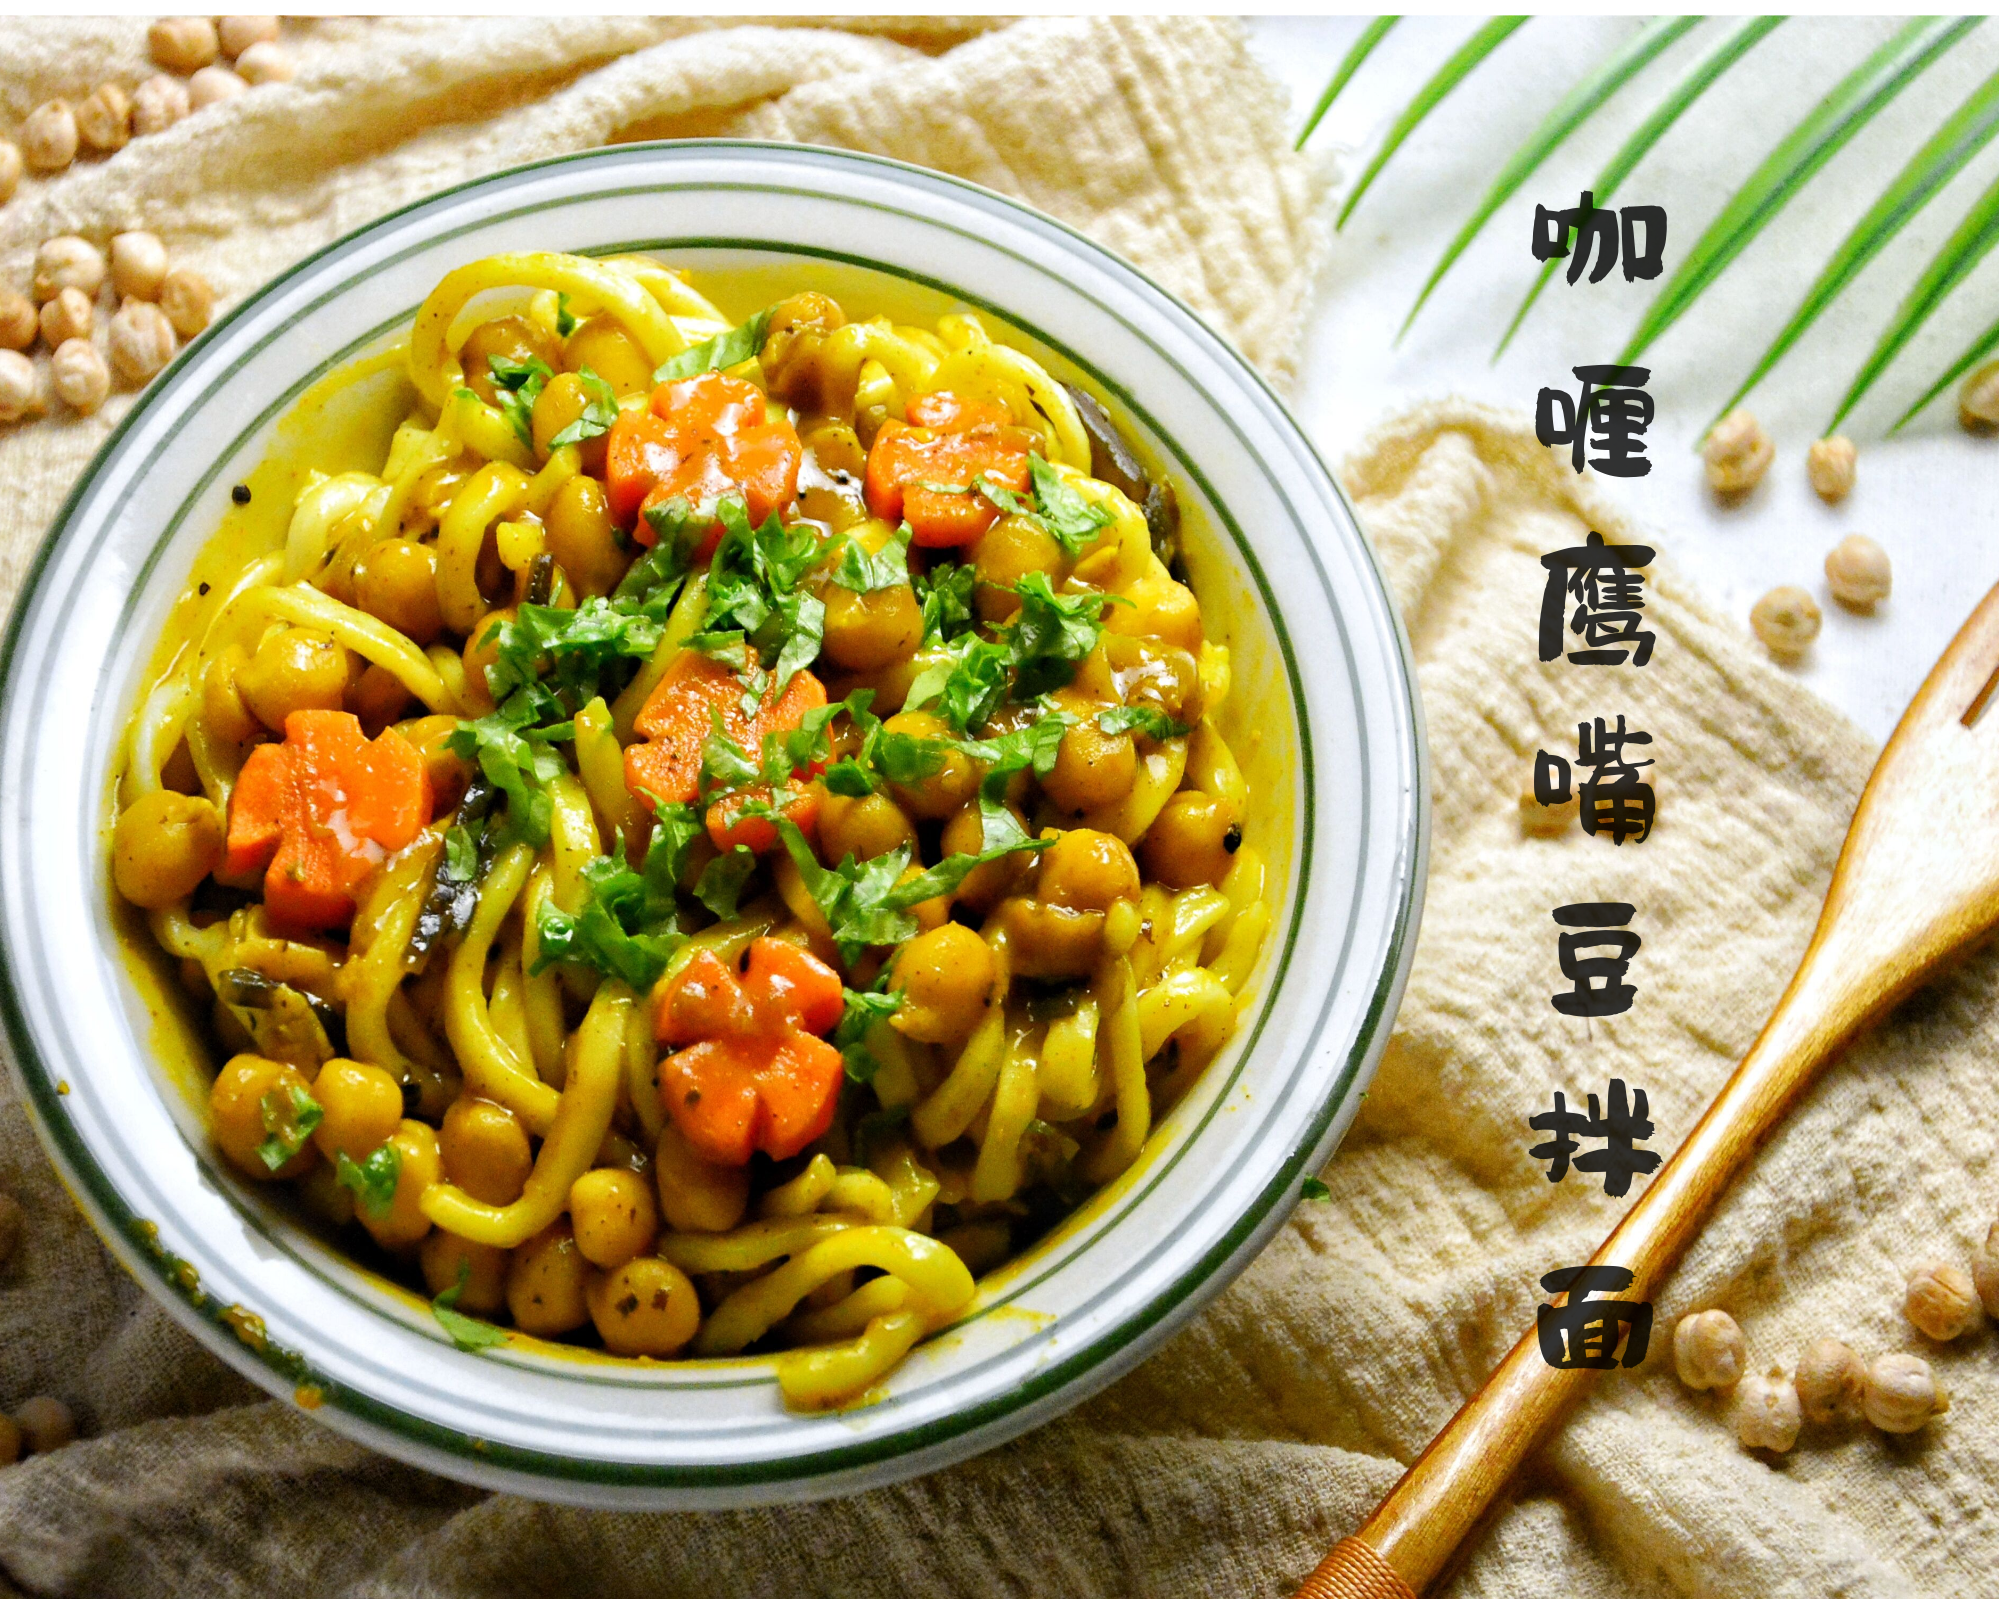 
Cookbook of devil of curry chick-pea noodles served with soy sauce